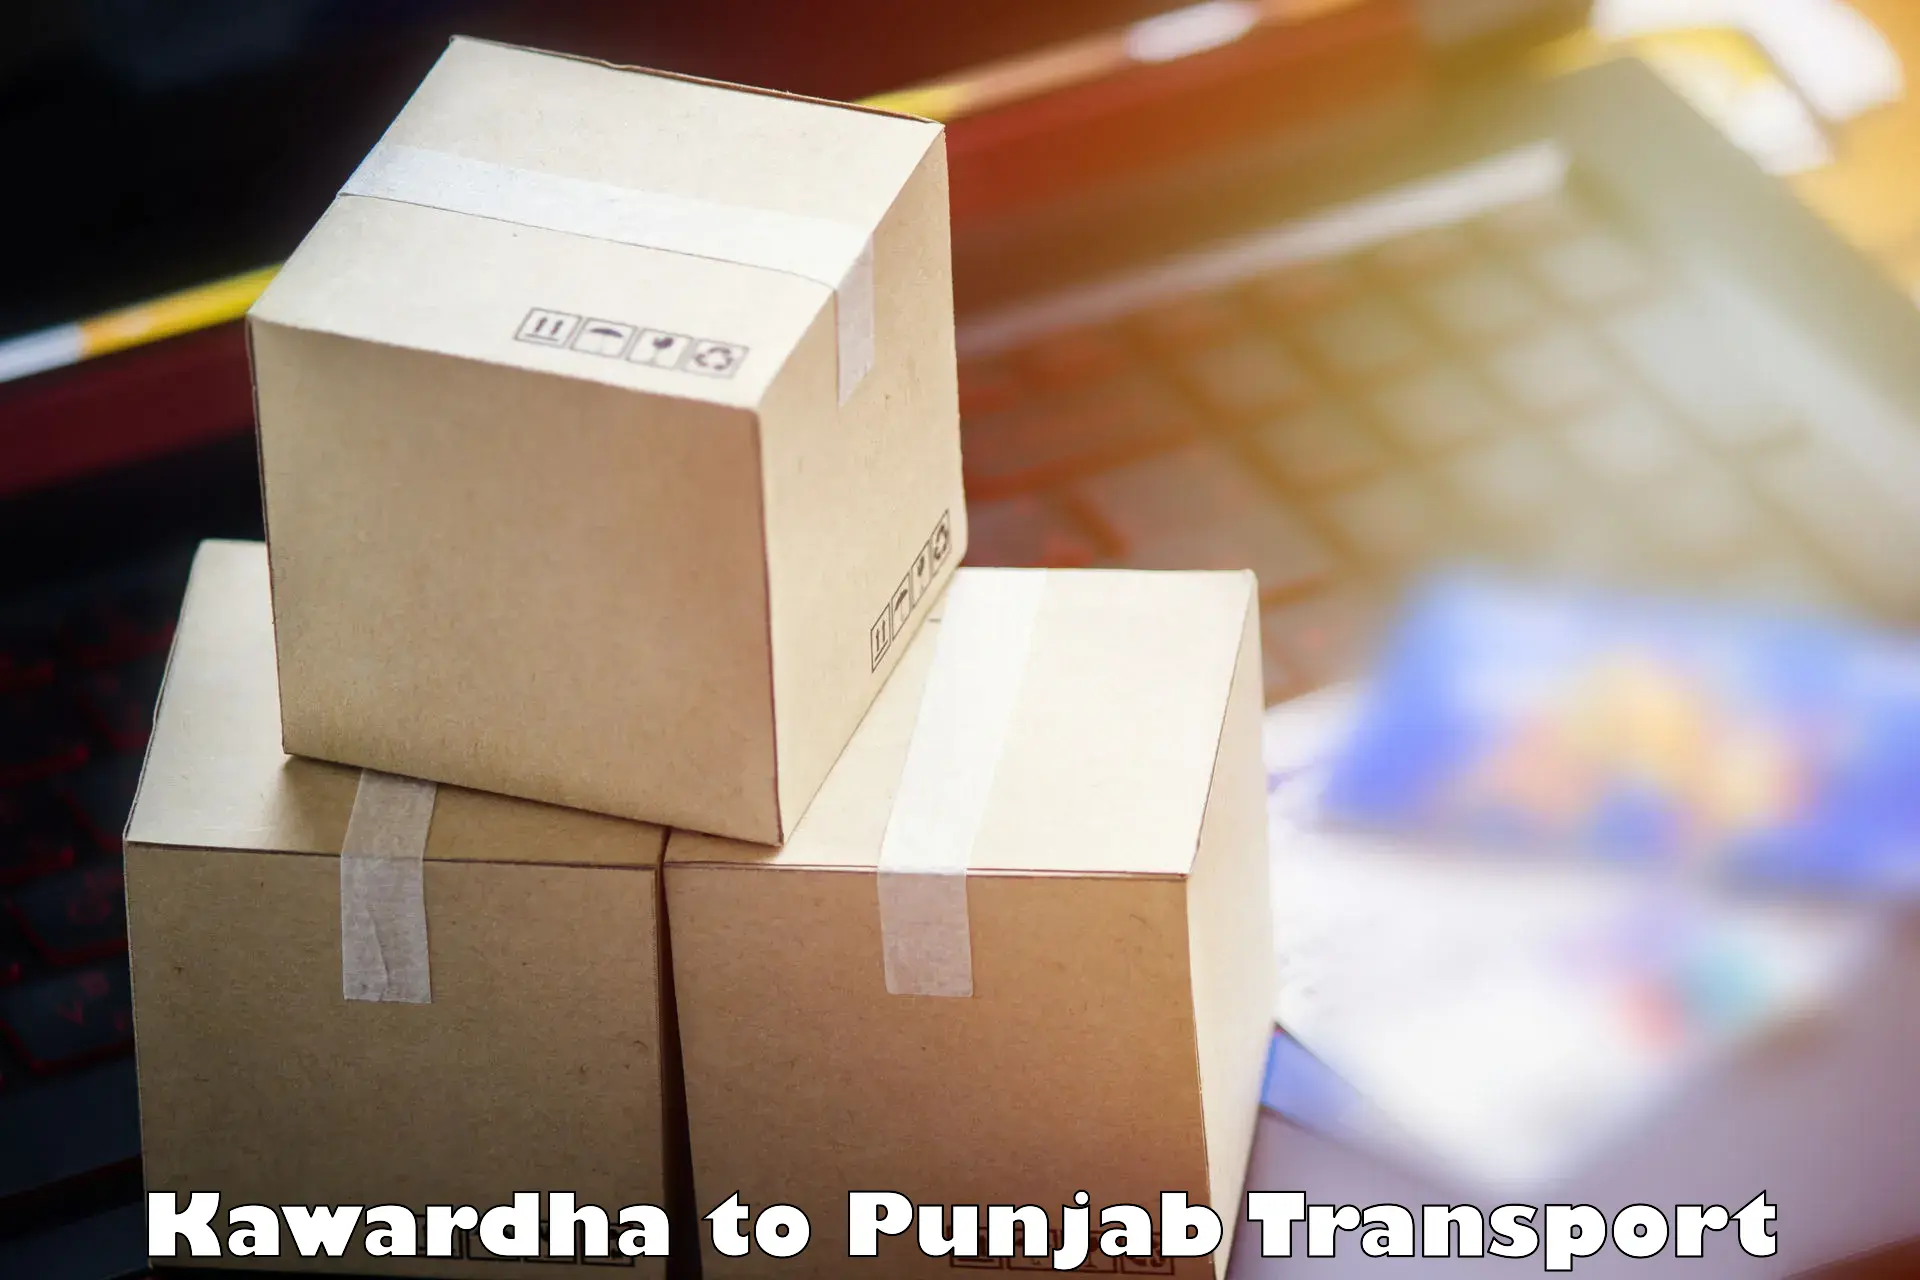 Container transport service Kawardha to IIT Ropar